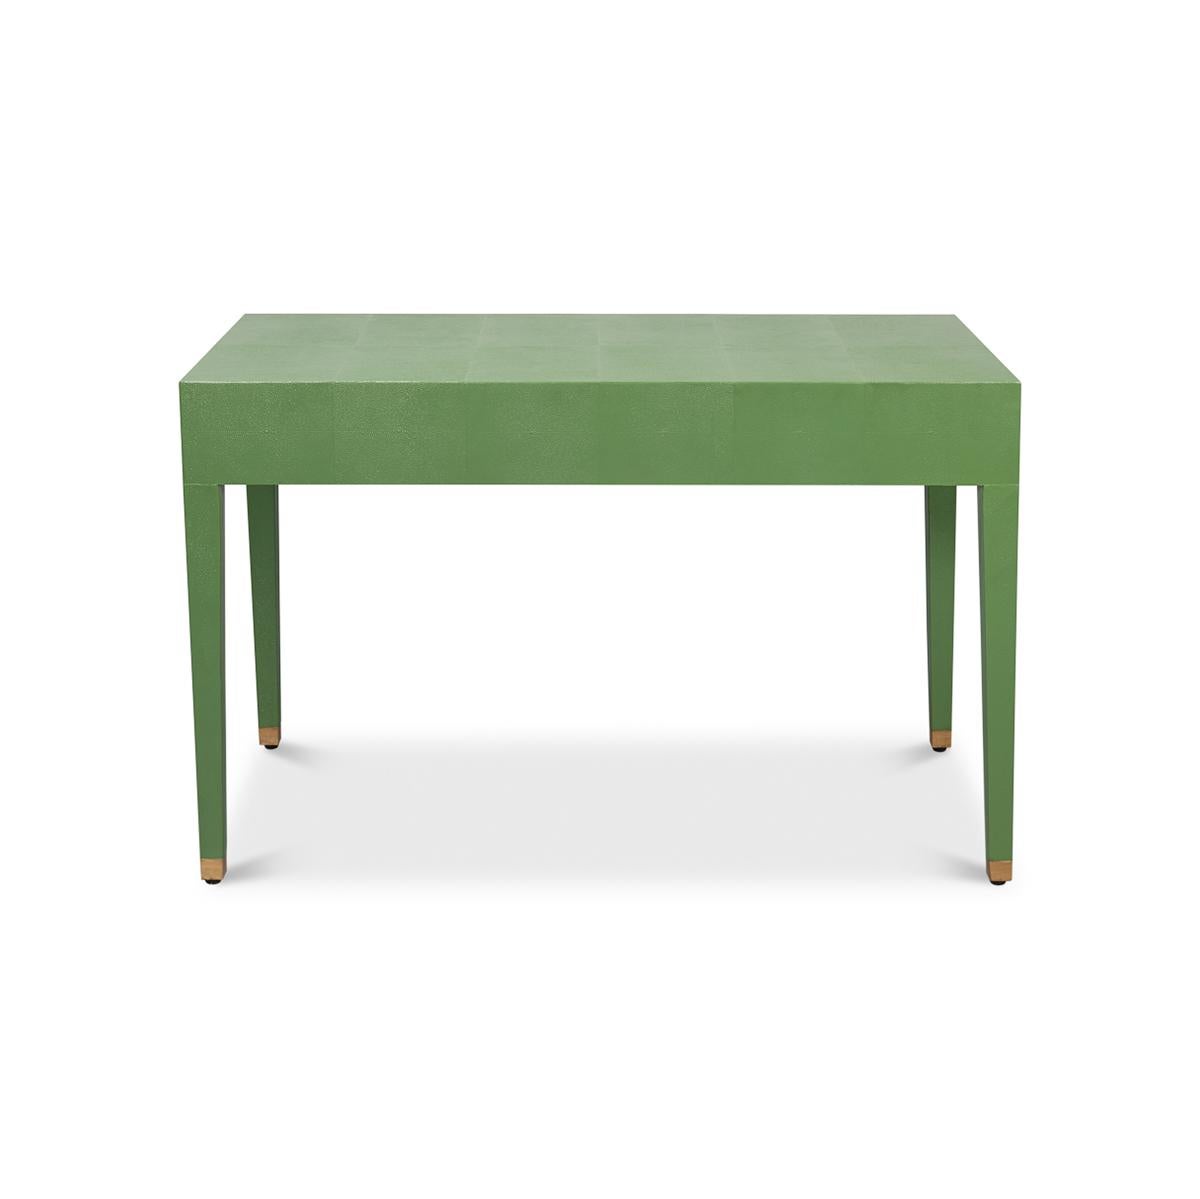 Art Deco Leather Desk In Watercress Green For Sale 2